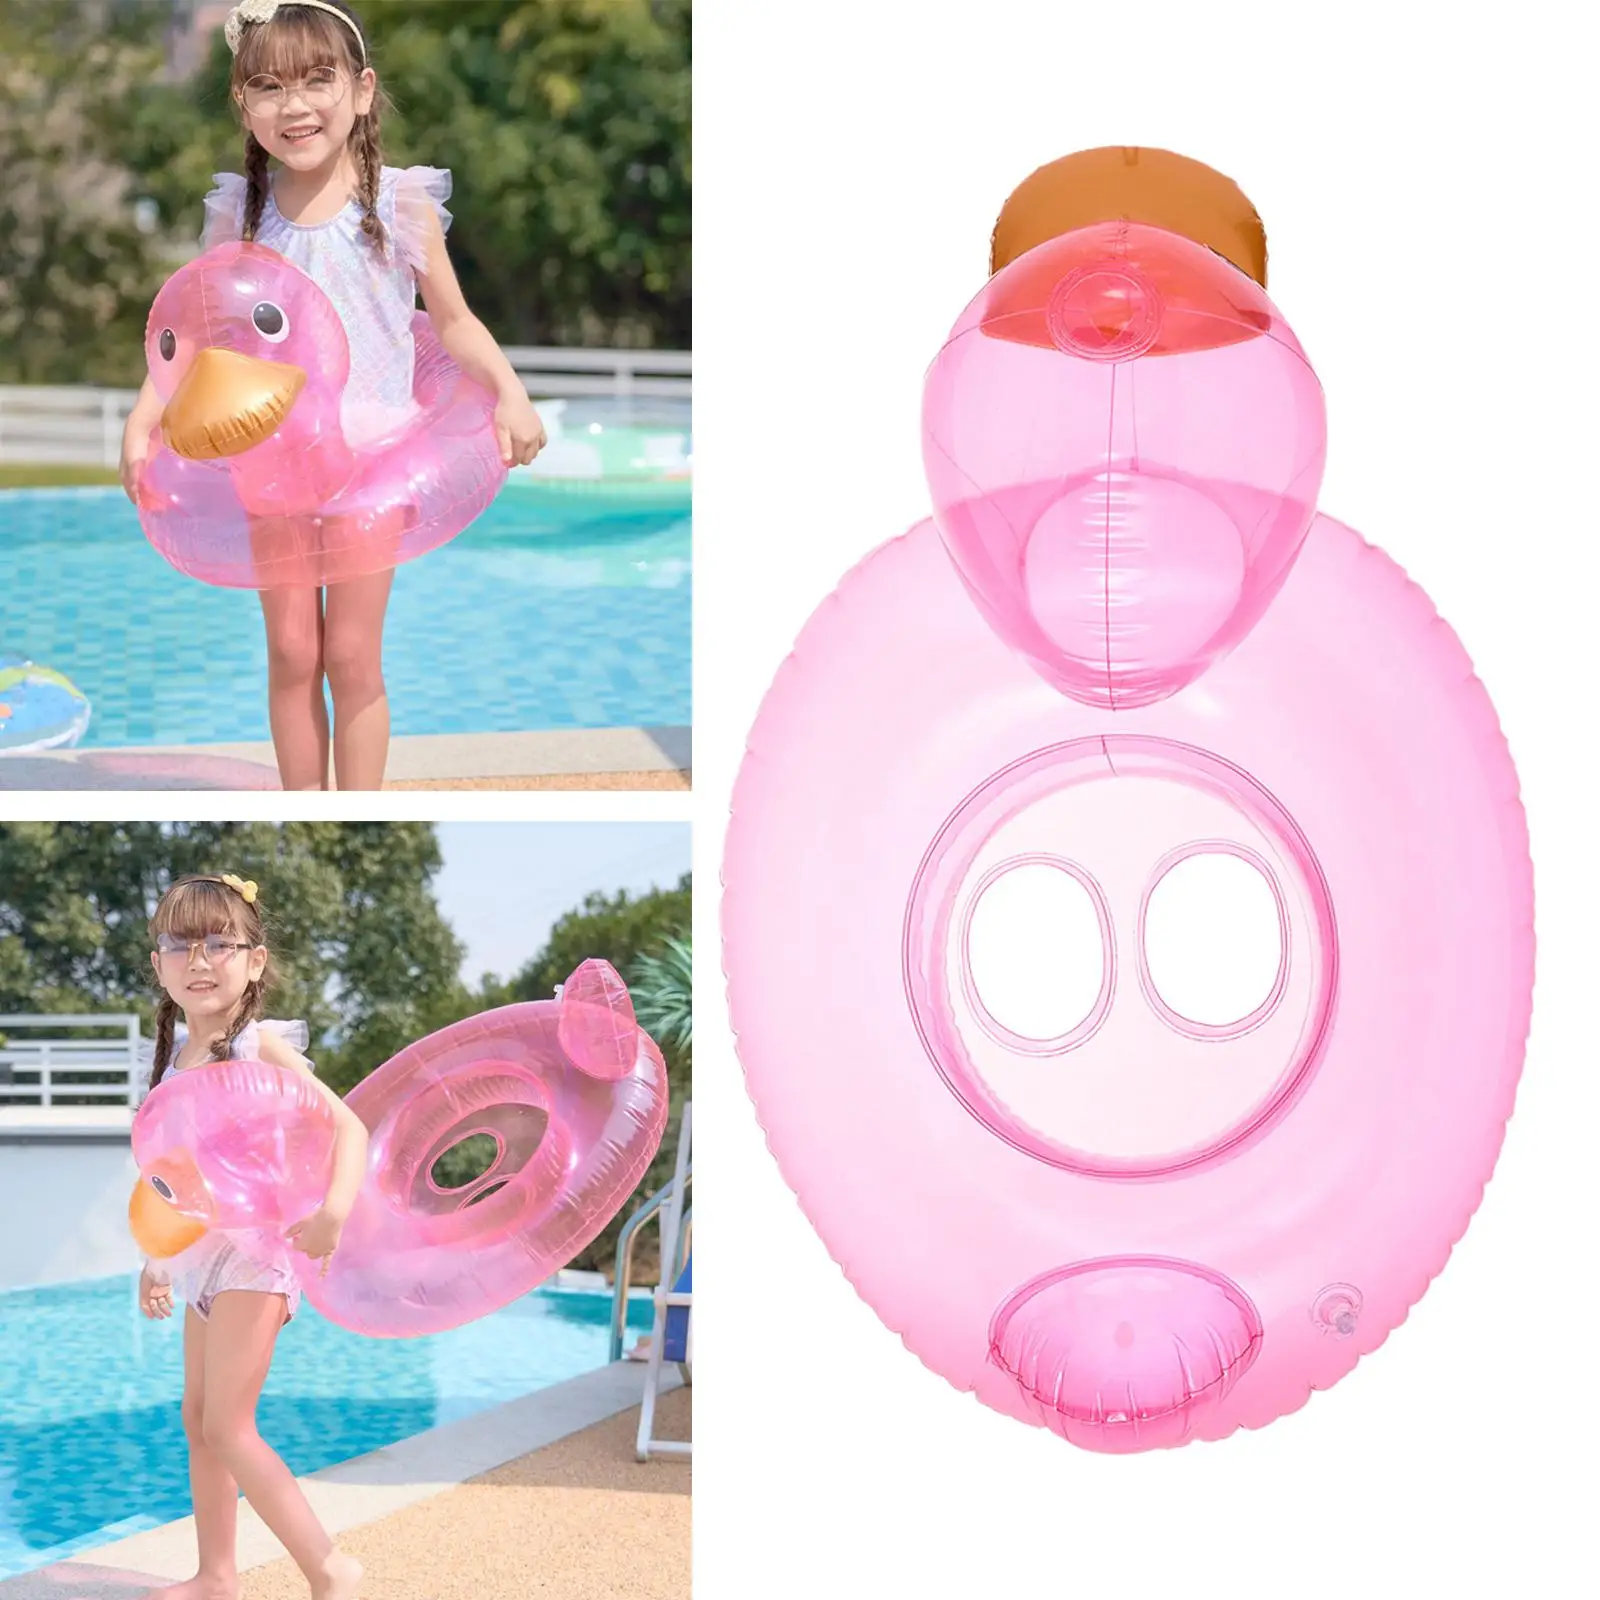 

Swimming Ring Floats Cute Lightweight Floating for Pool Lake Pool Parties Toddlers Children